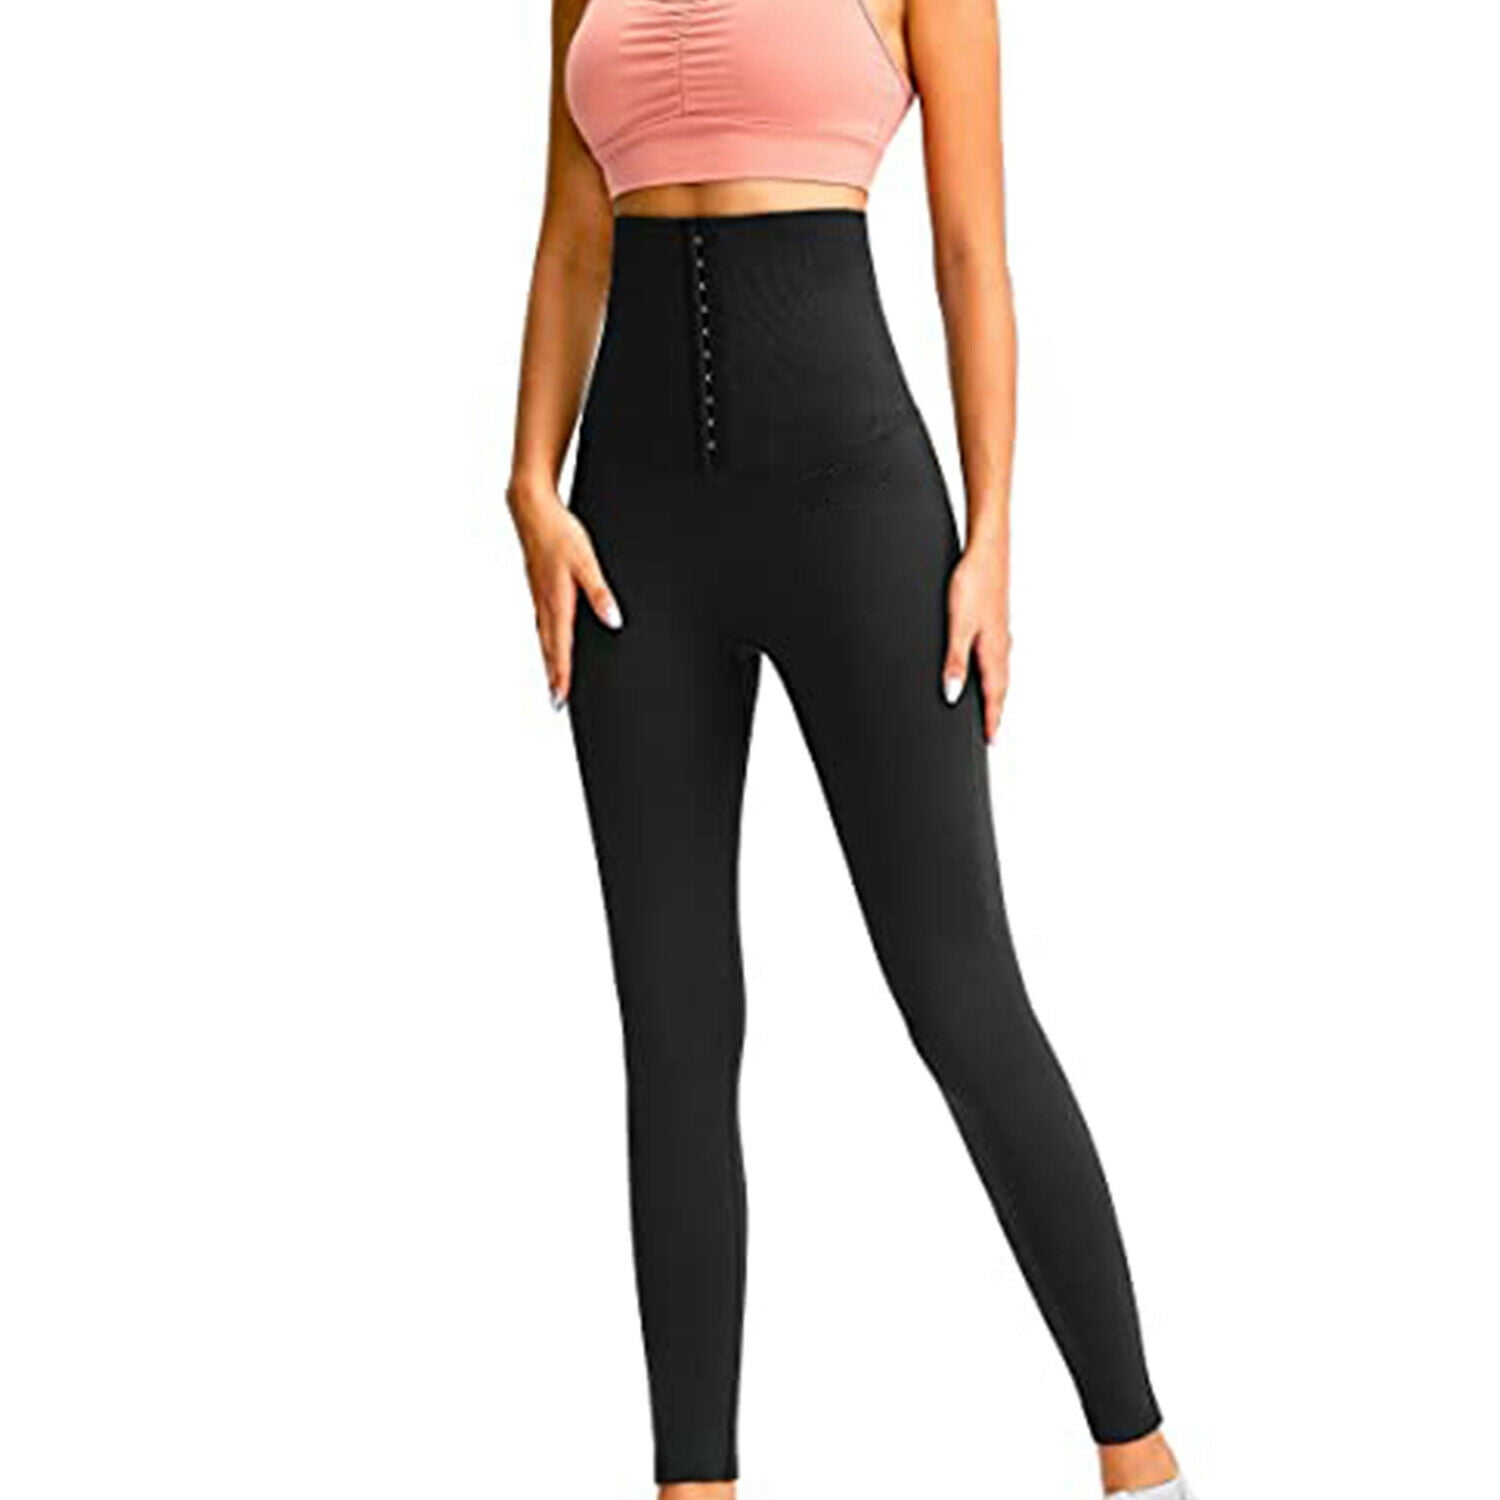 Yoga Pants High Waist Cinchers Shapewear Corset Stretchy Pants Tights Women  Sports Push Up Running Gym Fitness Leggings (Color : Black, Size : Small)